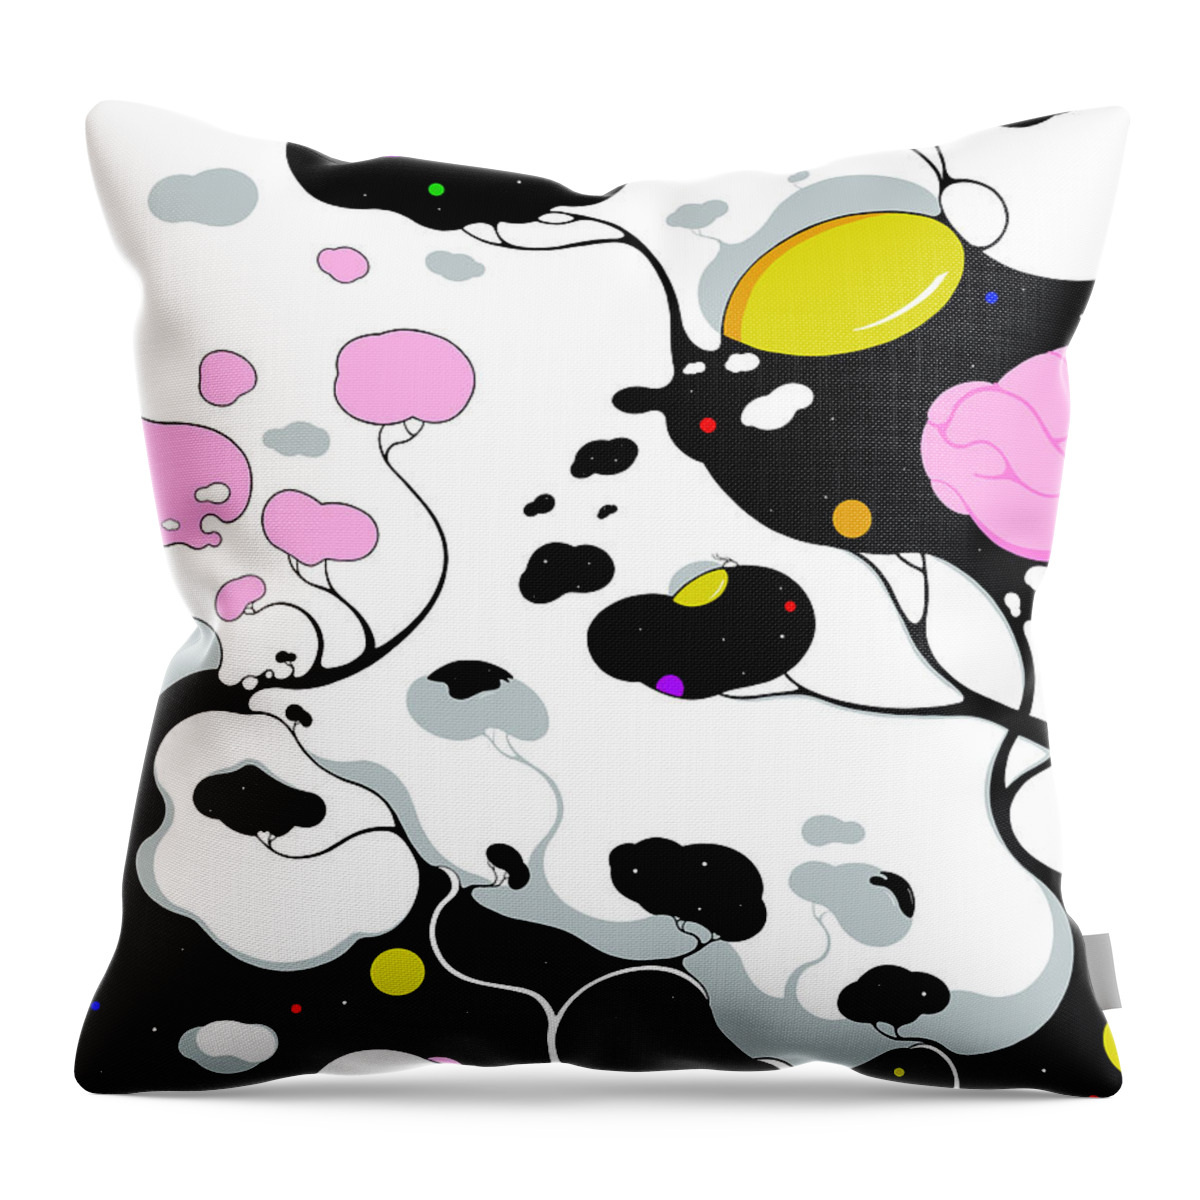 Clouds Throw Pillow featuring the digital art Kernel by Craig Tilley